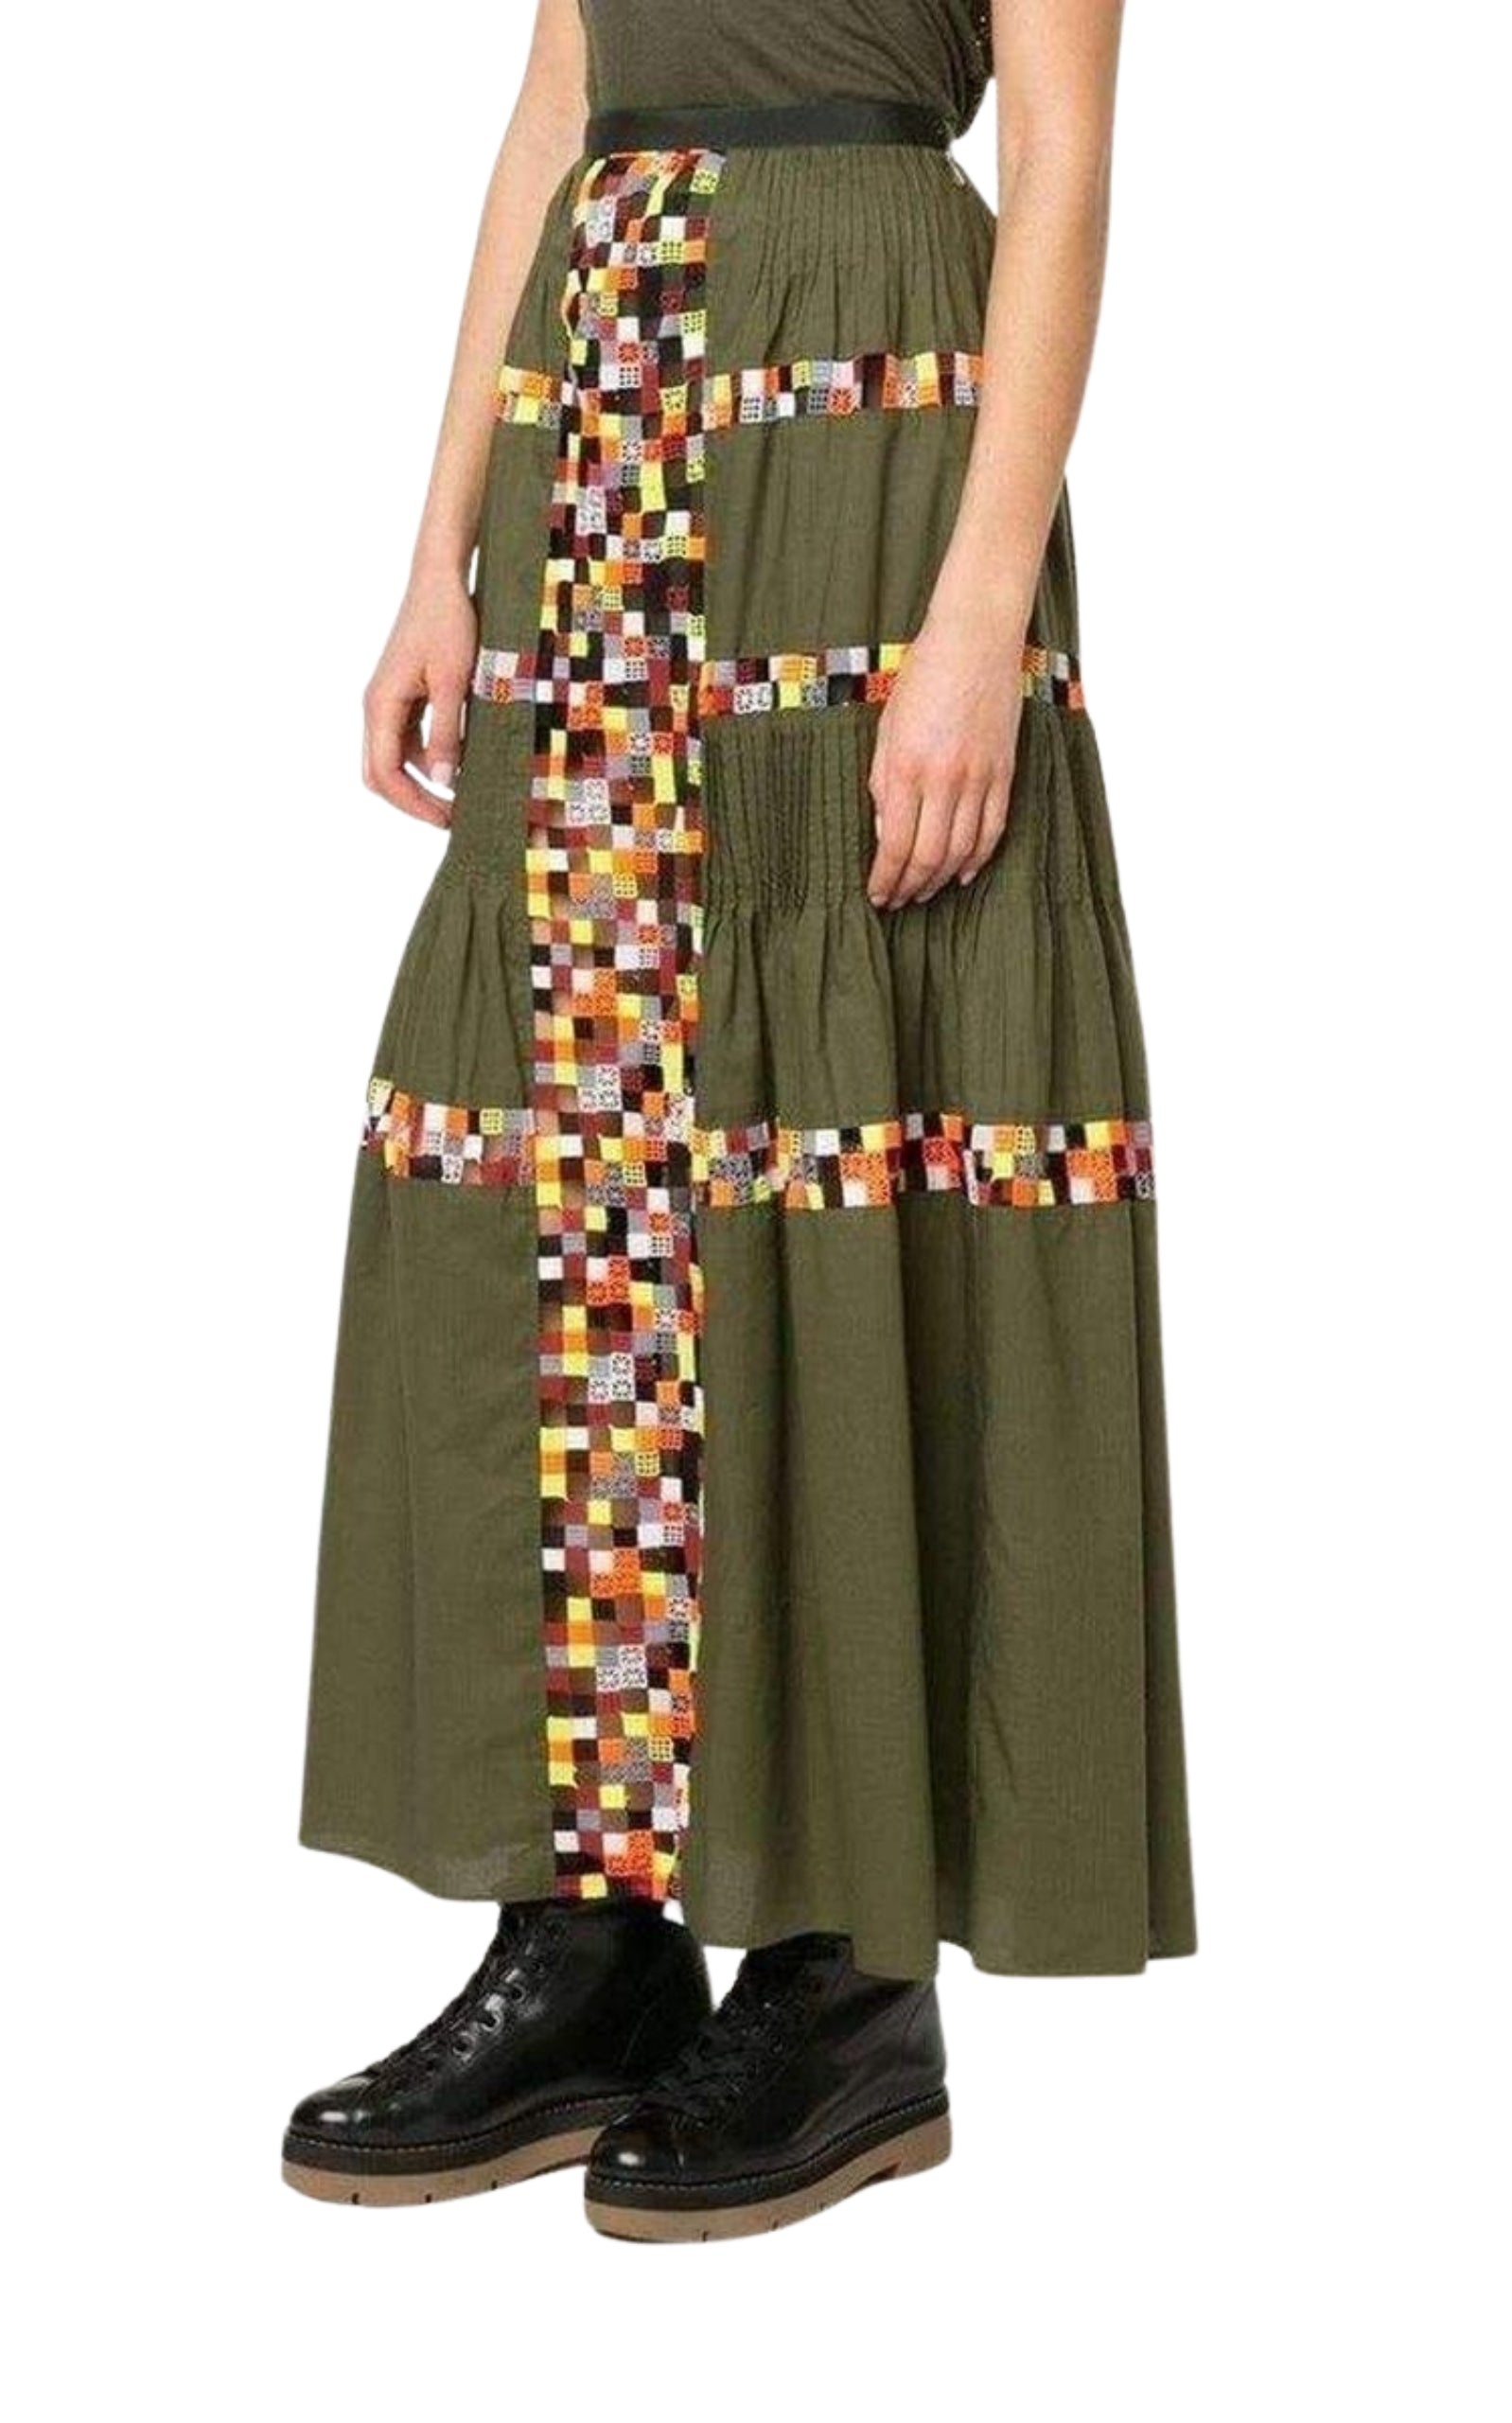 Military Green Embroidered Long Skirt - 3